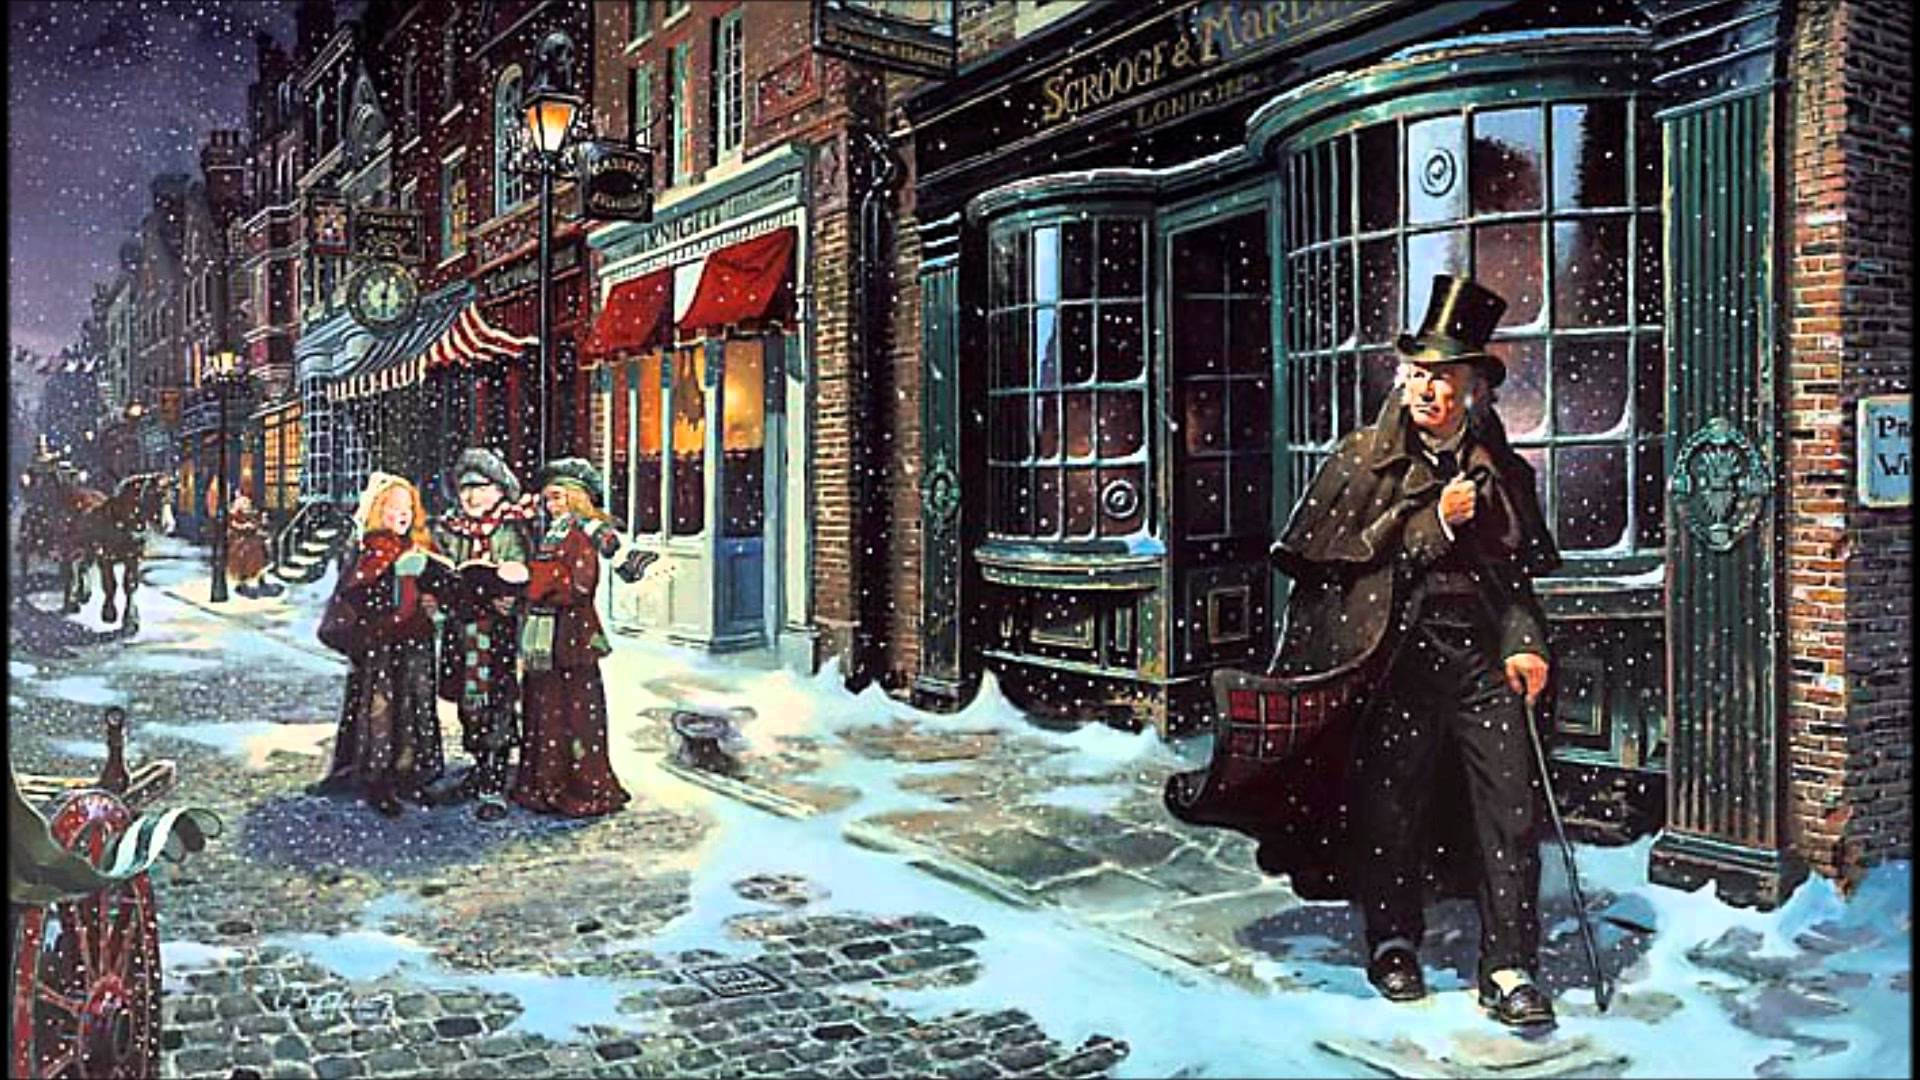 Ebenezer Scrooge- The iconic character from A Christmas Carol Wallpaper